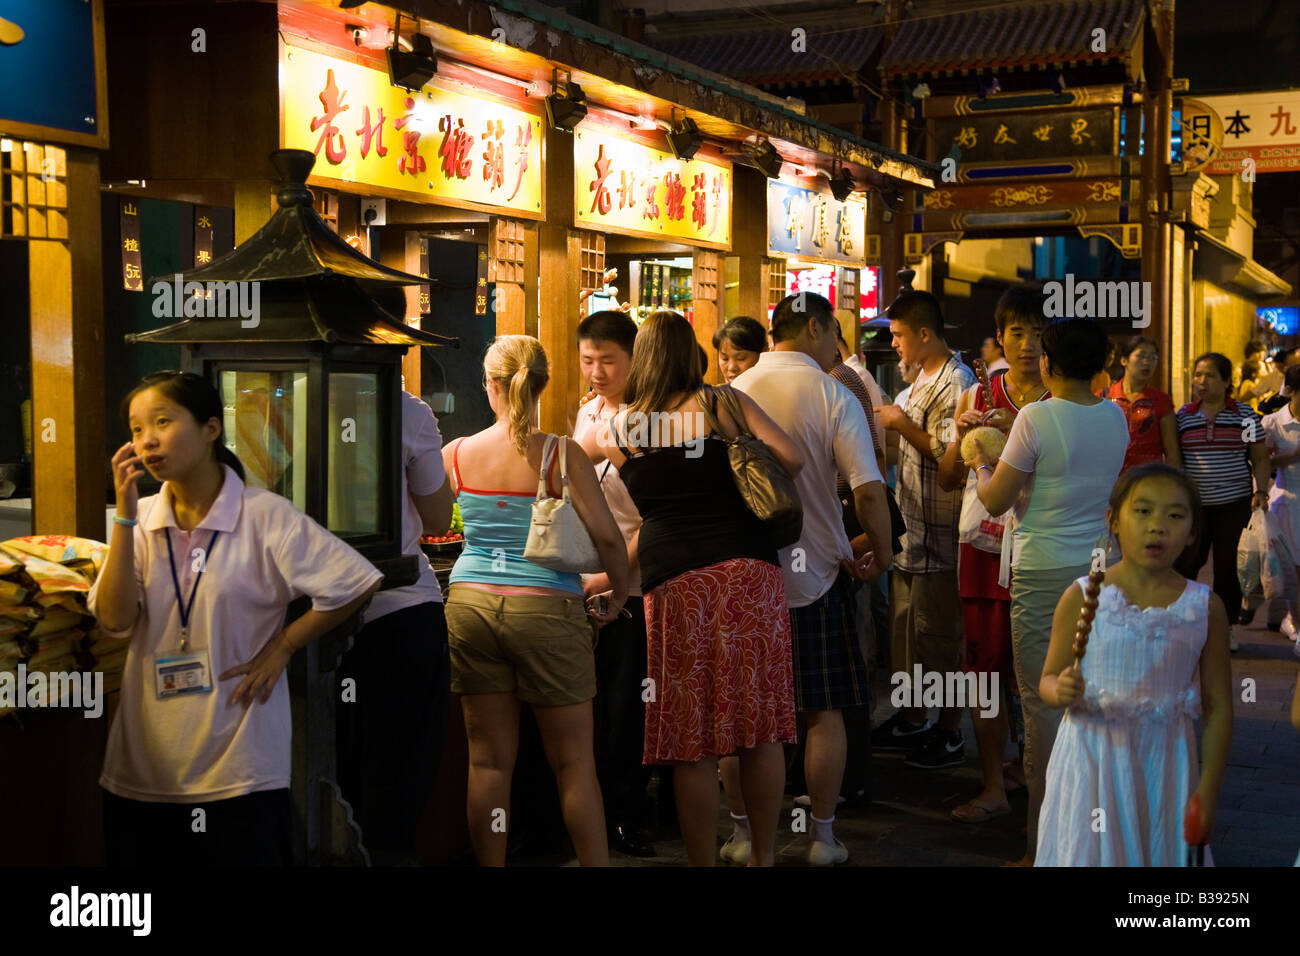 Chinese and foreigners mingle at food stall in Wanfujing Dajie Street Beijing's main shopping street at night JMH3188 Stock Photo